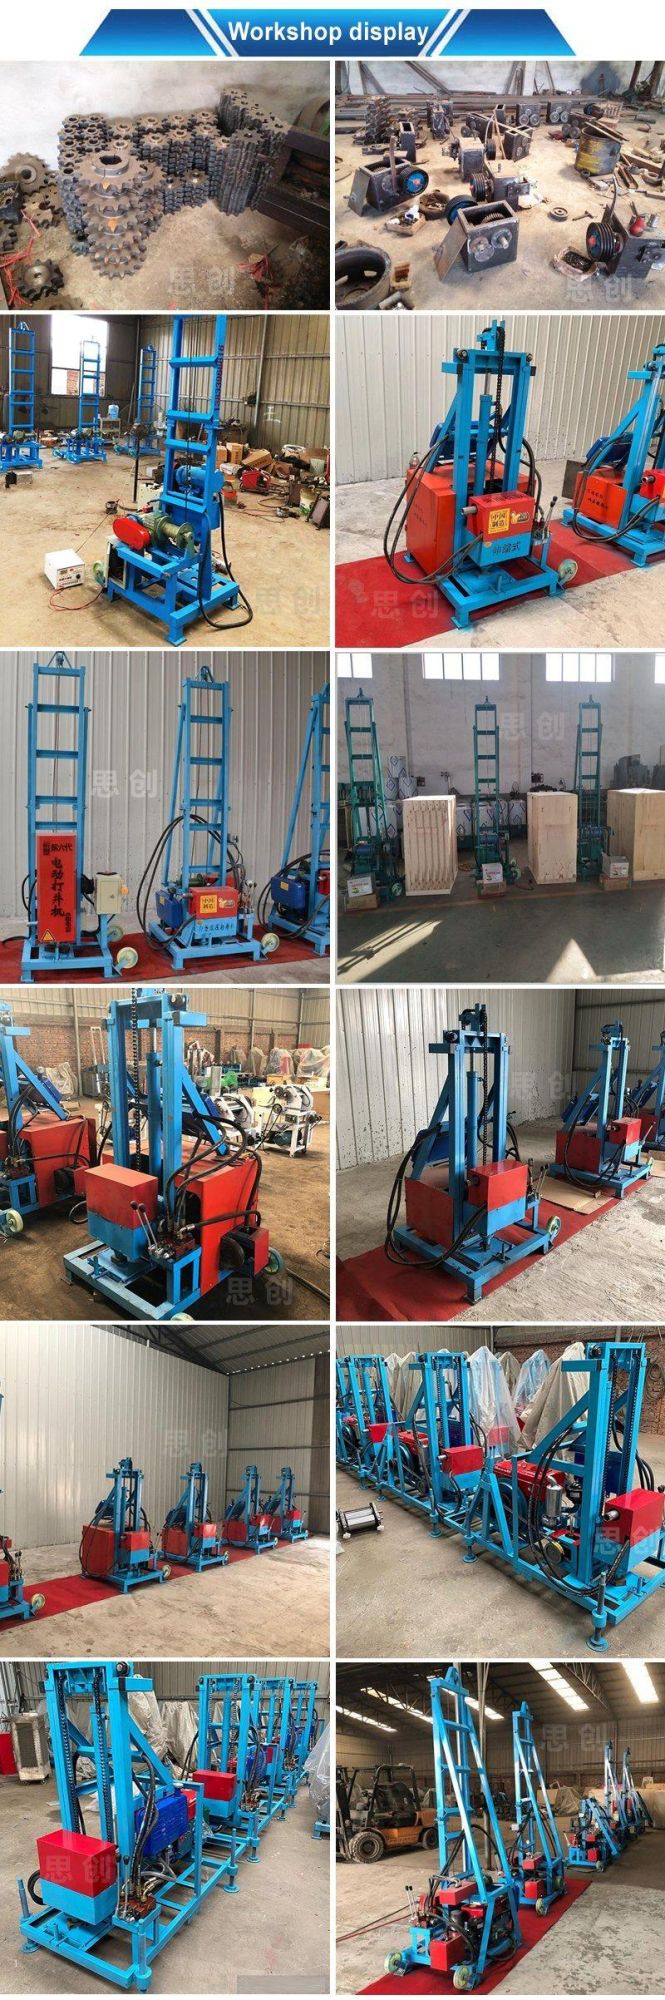 Two Wheels Trailer Mounted Water Well Drilling Machine for Sale